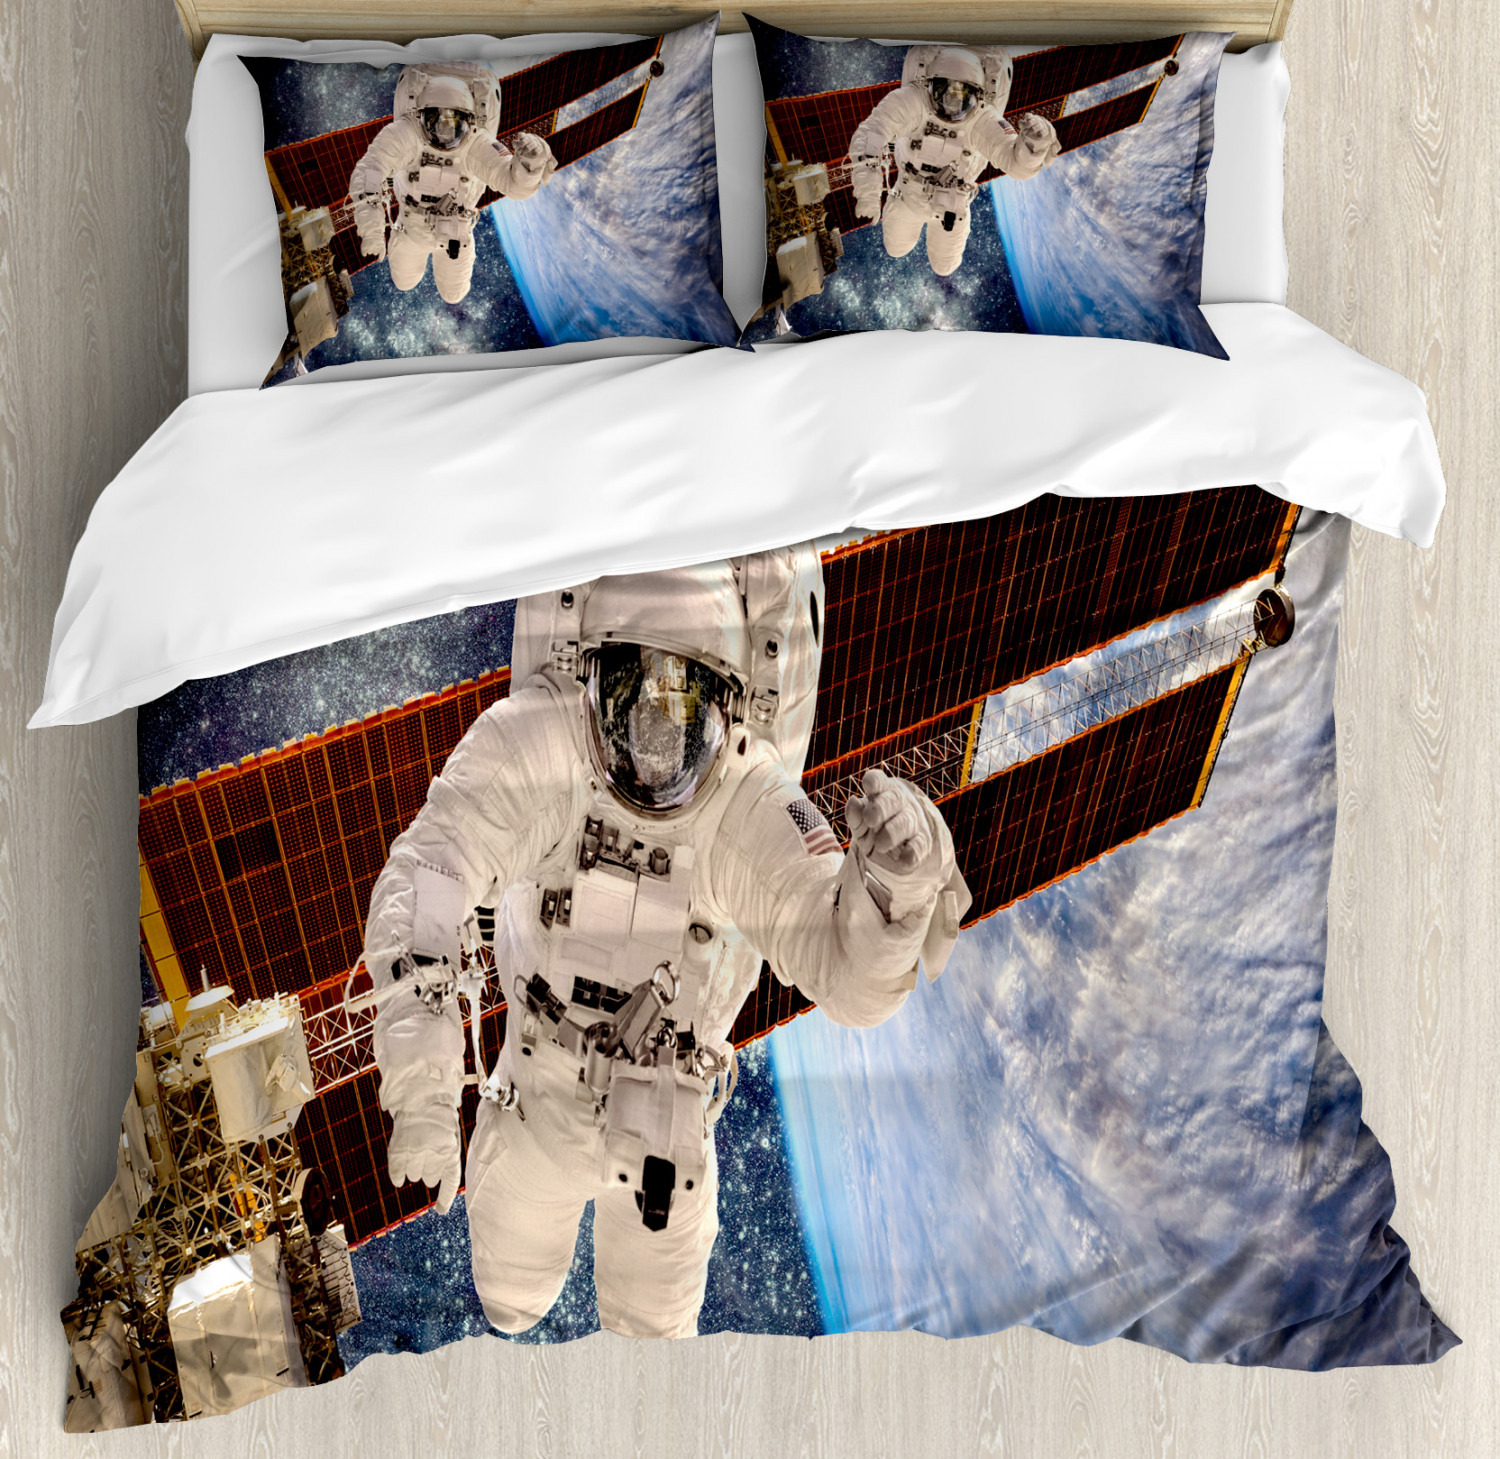 Outer Space Duvet Cover Set With Pillow Shams Gravity Astronaut